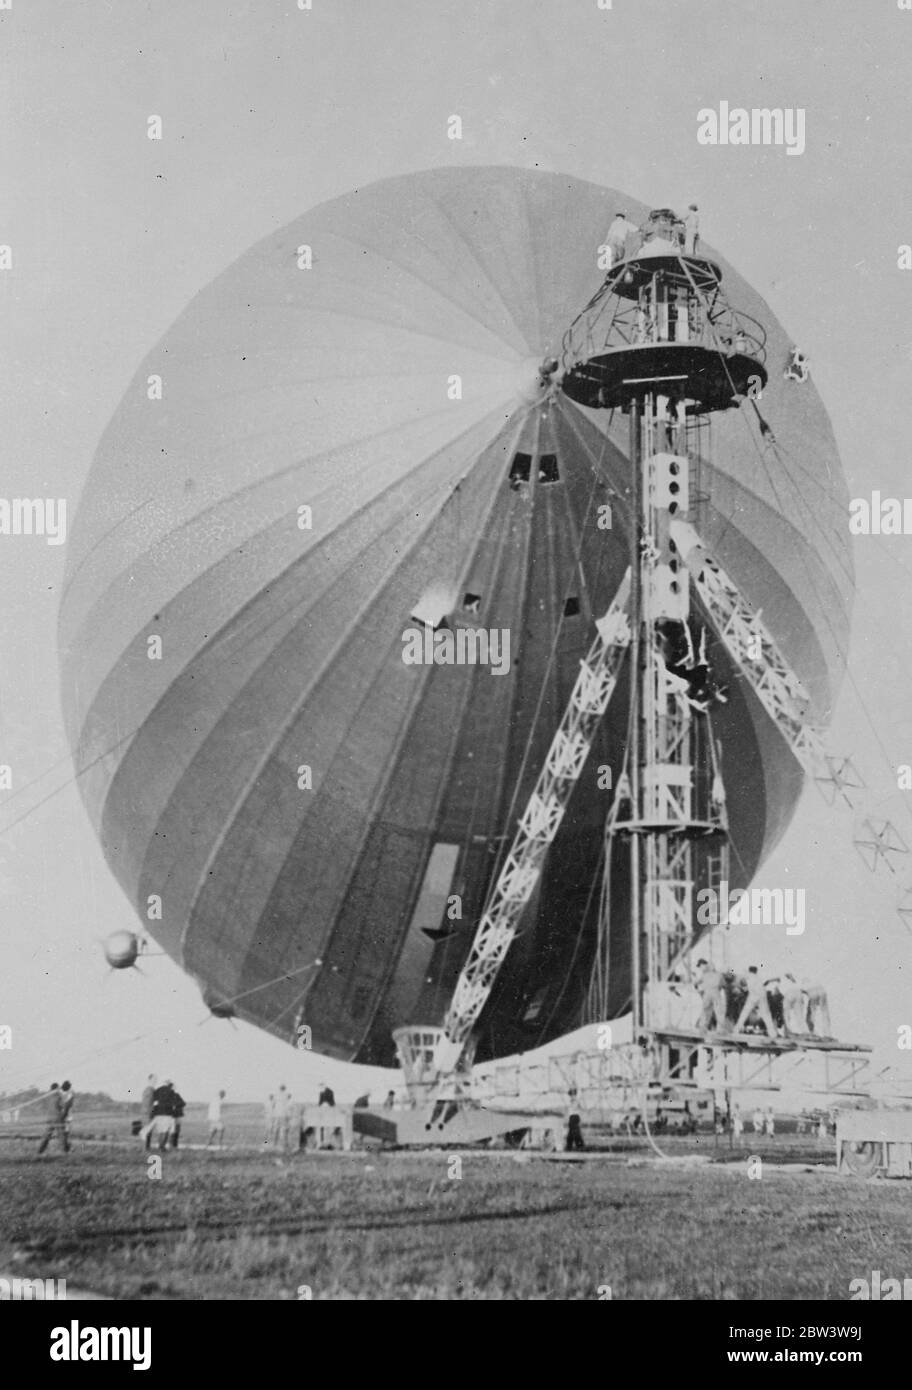 ' Hindenburg ' Germany ' s giant airship , at Rio De Janeiro . These pictures just received in London by air , show the ' Hindenburg ' , Germany ' s gigantic new airship , at the Santa Cruz aerodrome Rio de Janeiro agter her maiden voyage to South America from Friedrichshaven . A special mast and hangar had been built at the aerodrome to accommadate the new airship . Photo shows , the Hindenburg being fastened to her mooring mast at Rio de Janeiro . 13 April 1936 Stock Photo